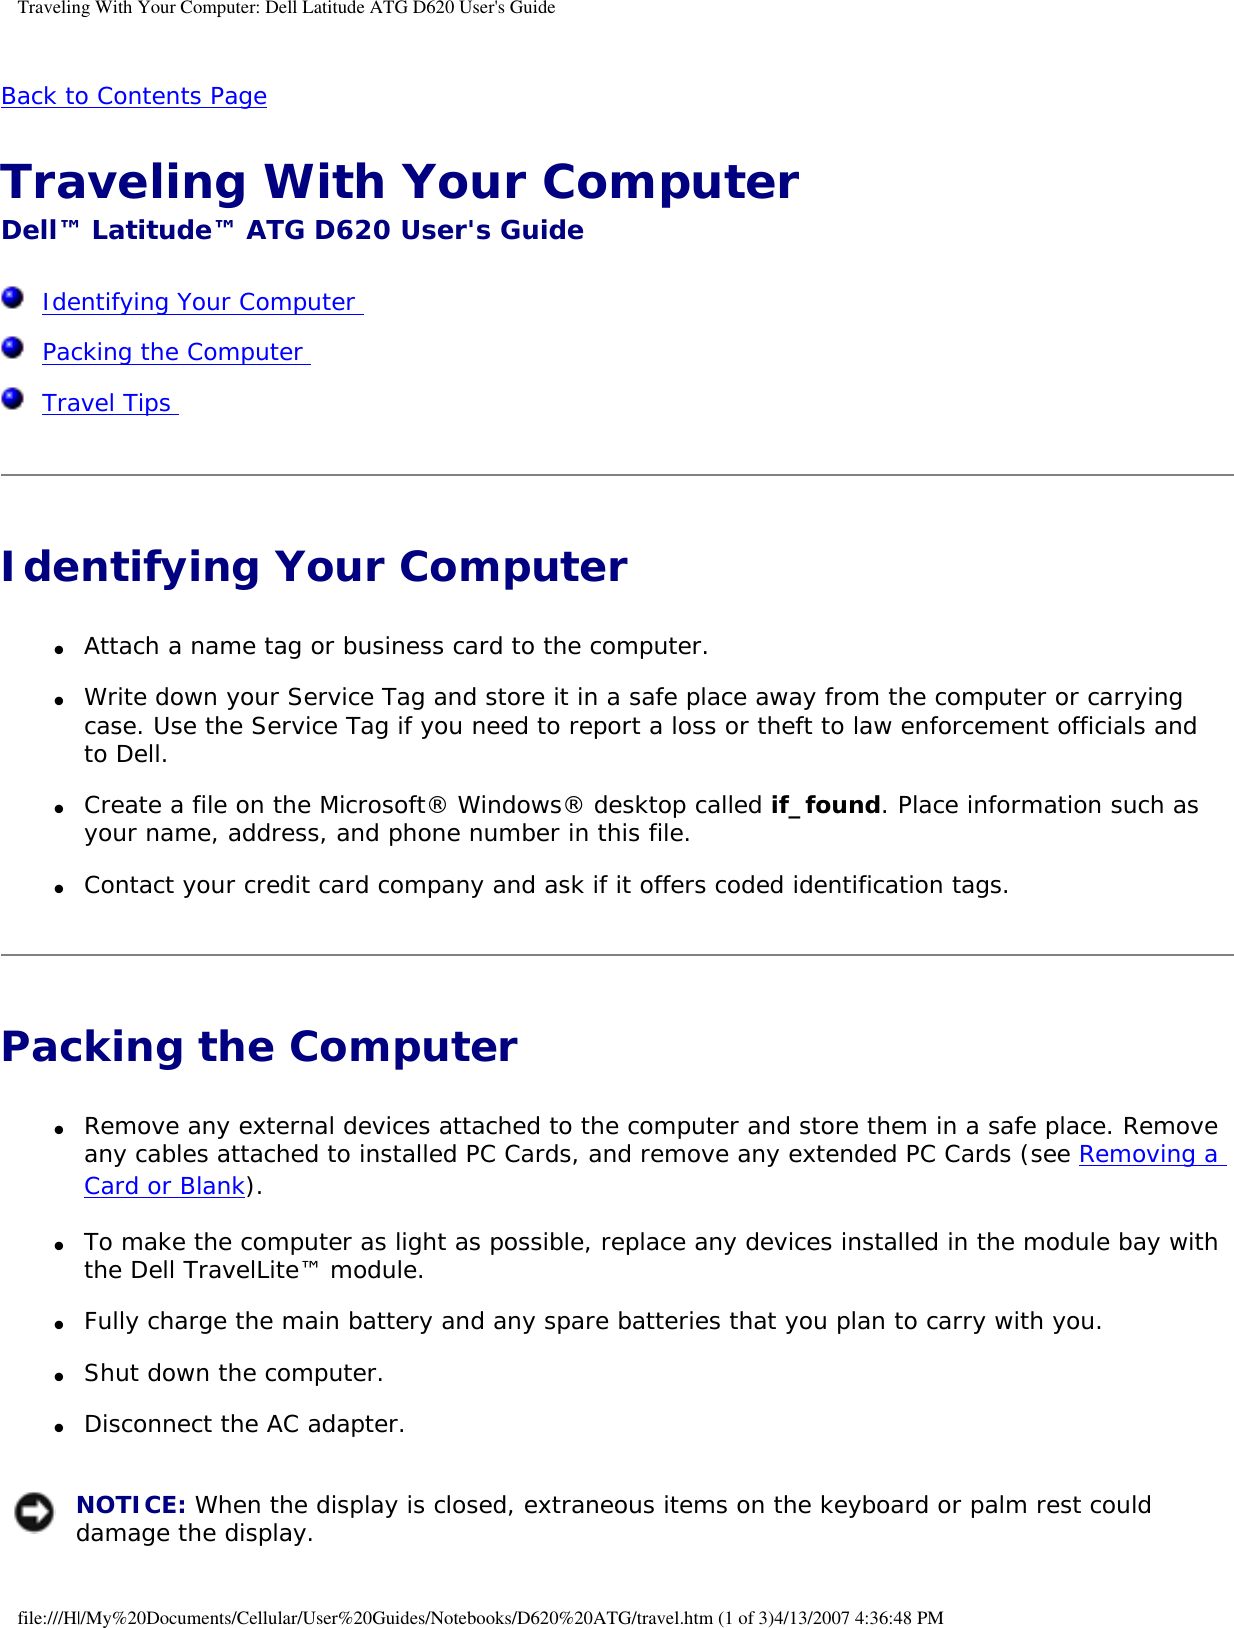 Traveling With Your Computer: Dell Latitude ATG D620 User&apos;s GuideBack to Contents Page Traveling With Your Computer Dell™ Latitude™ ATG D620 User&apos;s Guide  Identifying Your Computer   Packing the Computer   Travel Tips  Identifying Your Computer ●     Attach a name tag or business card to the computer.  ●     Write down your Service Tag and store it in a safe place away from the computer or carrying case. Use the Service Tag if you need to report a loss or theft to law enforcement officials and to Dell.  ●     Create a file on the Microsoft® Windows® desktop called if_found. Place information such as your name, address, and phone number in this file.  ●     Contact your credit card company and ask if it offers coded identification tags.  Packing the Computer ●     Remove any external devices attached to the computer and store them in a safe place. Remove any cables attached to installed PC Cards, and remove any extended PC Cards (see Removing a Card or Blank).  ●     To make the computer as light as possible, replace any devices installed in the module bay with the Dell TravelLite™ module.  ●     Fully charge the main battery and any spare batteries that you plan to carry with you.  ●     Shut down the computer.  ●     Disconnect the AC adapter.   NOTICE: When the display is closed, extraneous items on the keyboard or palm rest could damage the display. file:///H|/My%20Documents/Cellular/User%20Guides/Notebooks/D620%20ATG/travel.htm (1 of 3)4/13/2007 4:36:48 PM